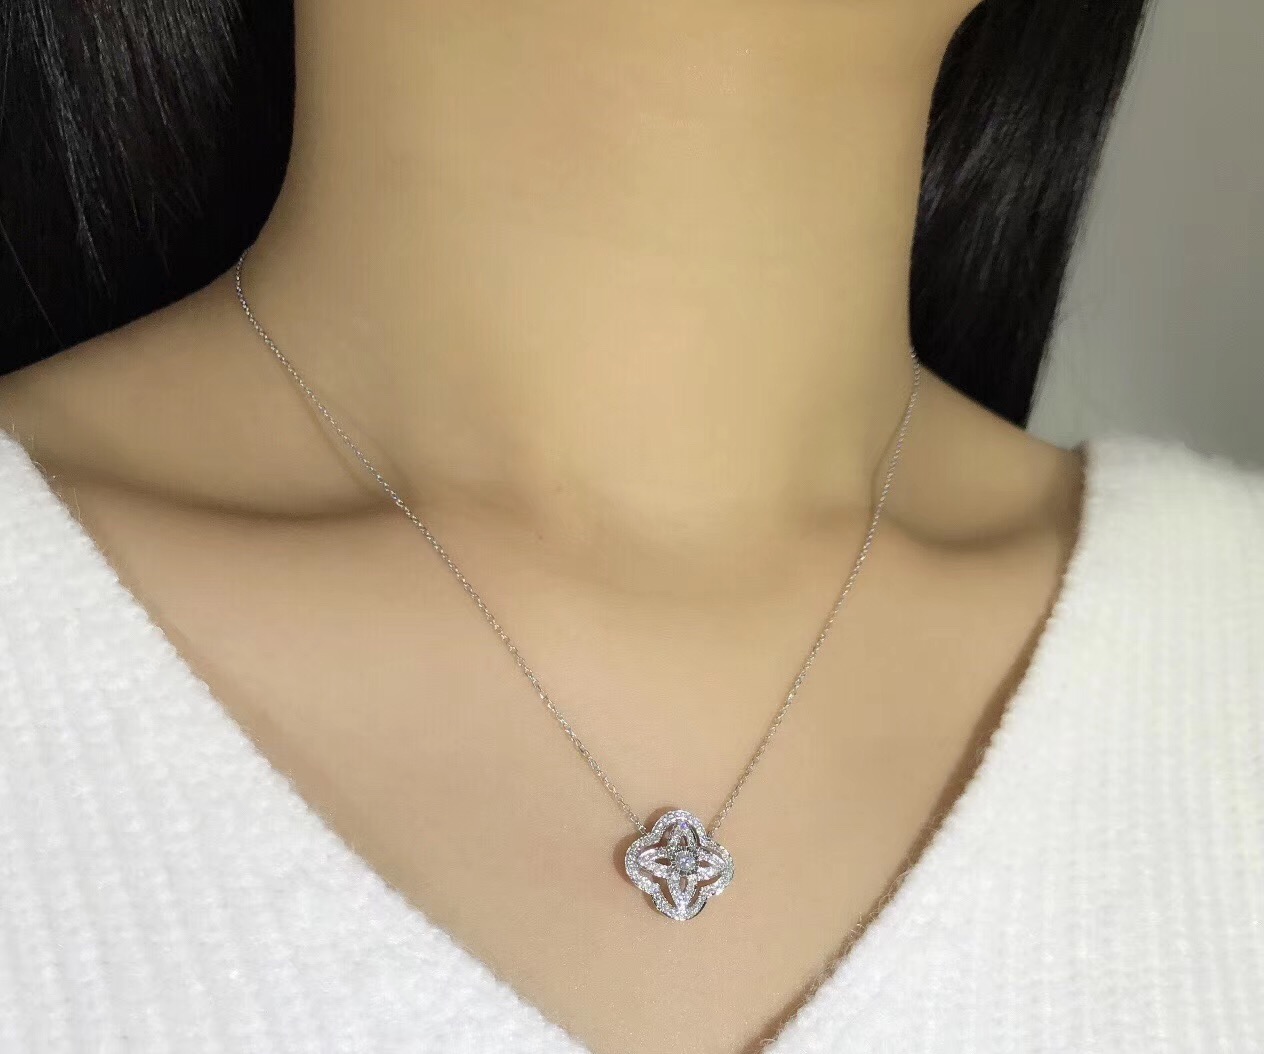 P00833 Flower Shaped Diamond Necklace in 18k White Gold